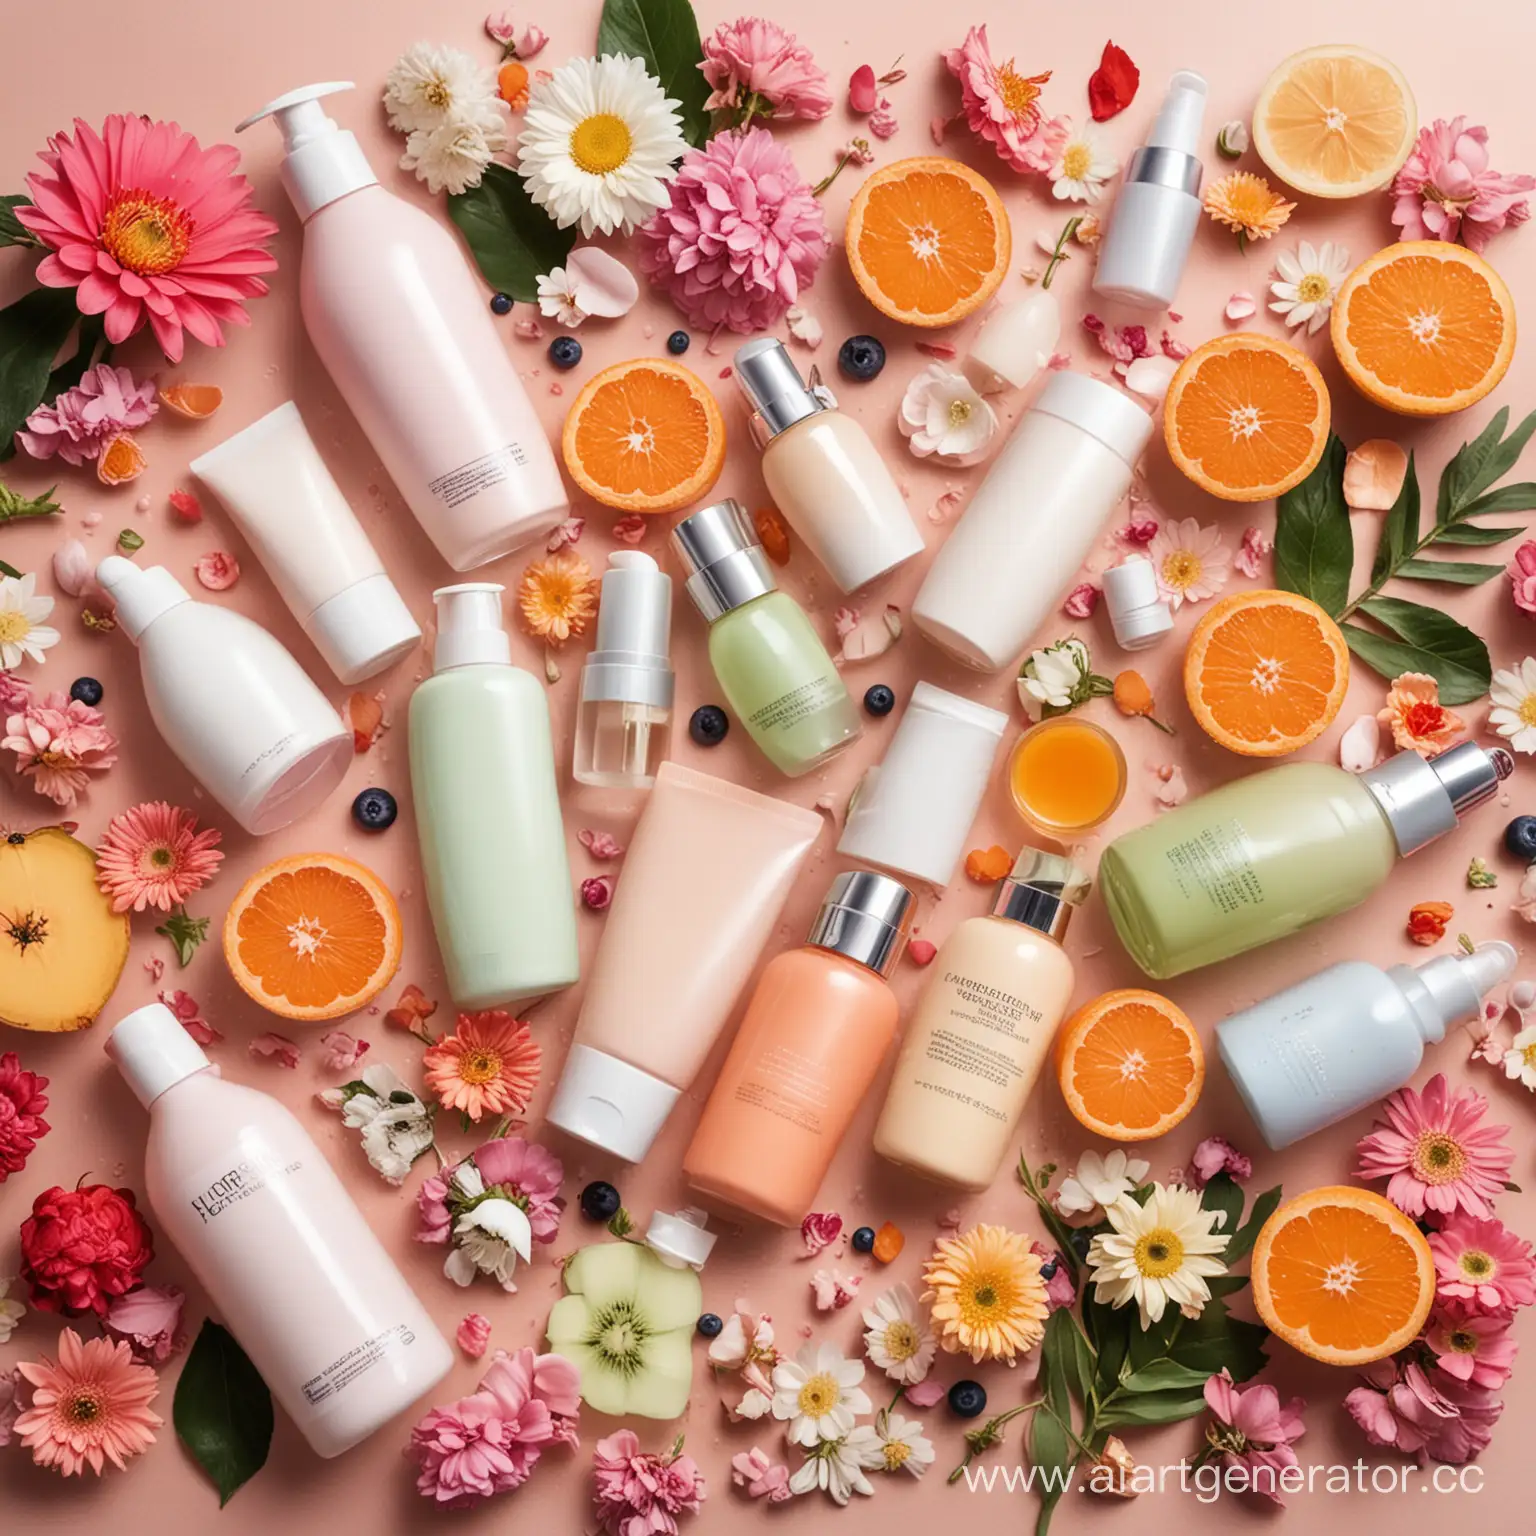 Assorted-Skincare-Products-Bottles-Flowers-and-Fruits-Display